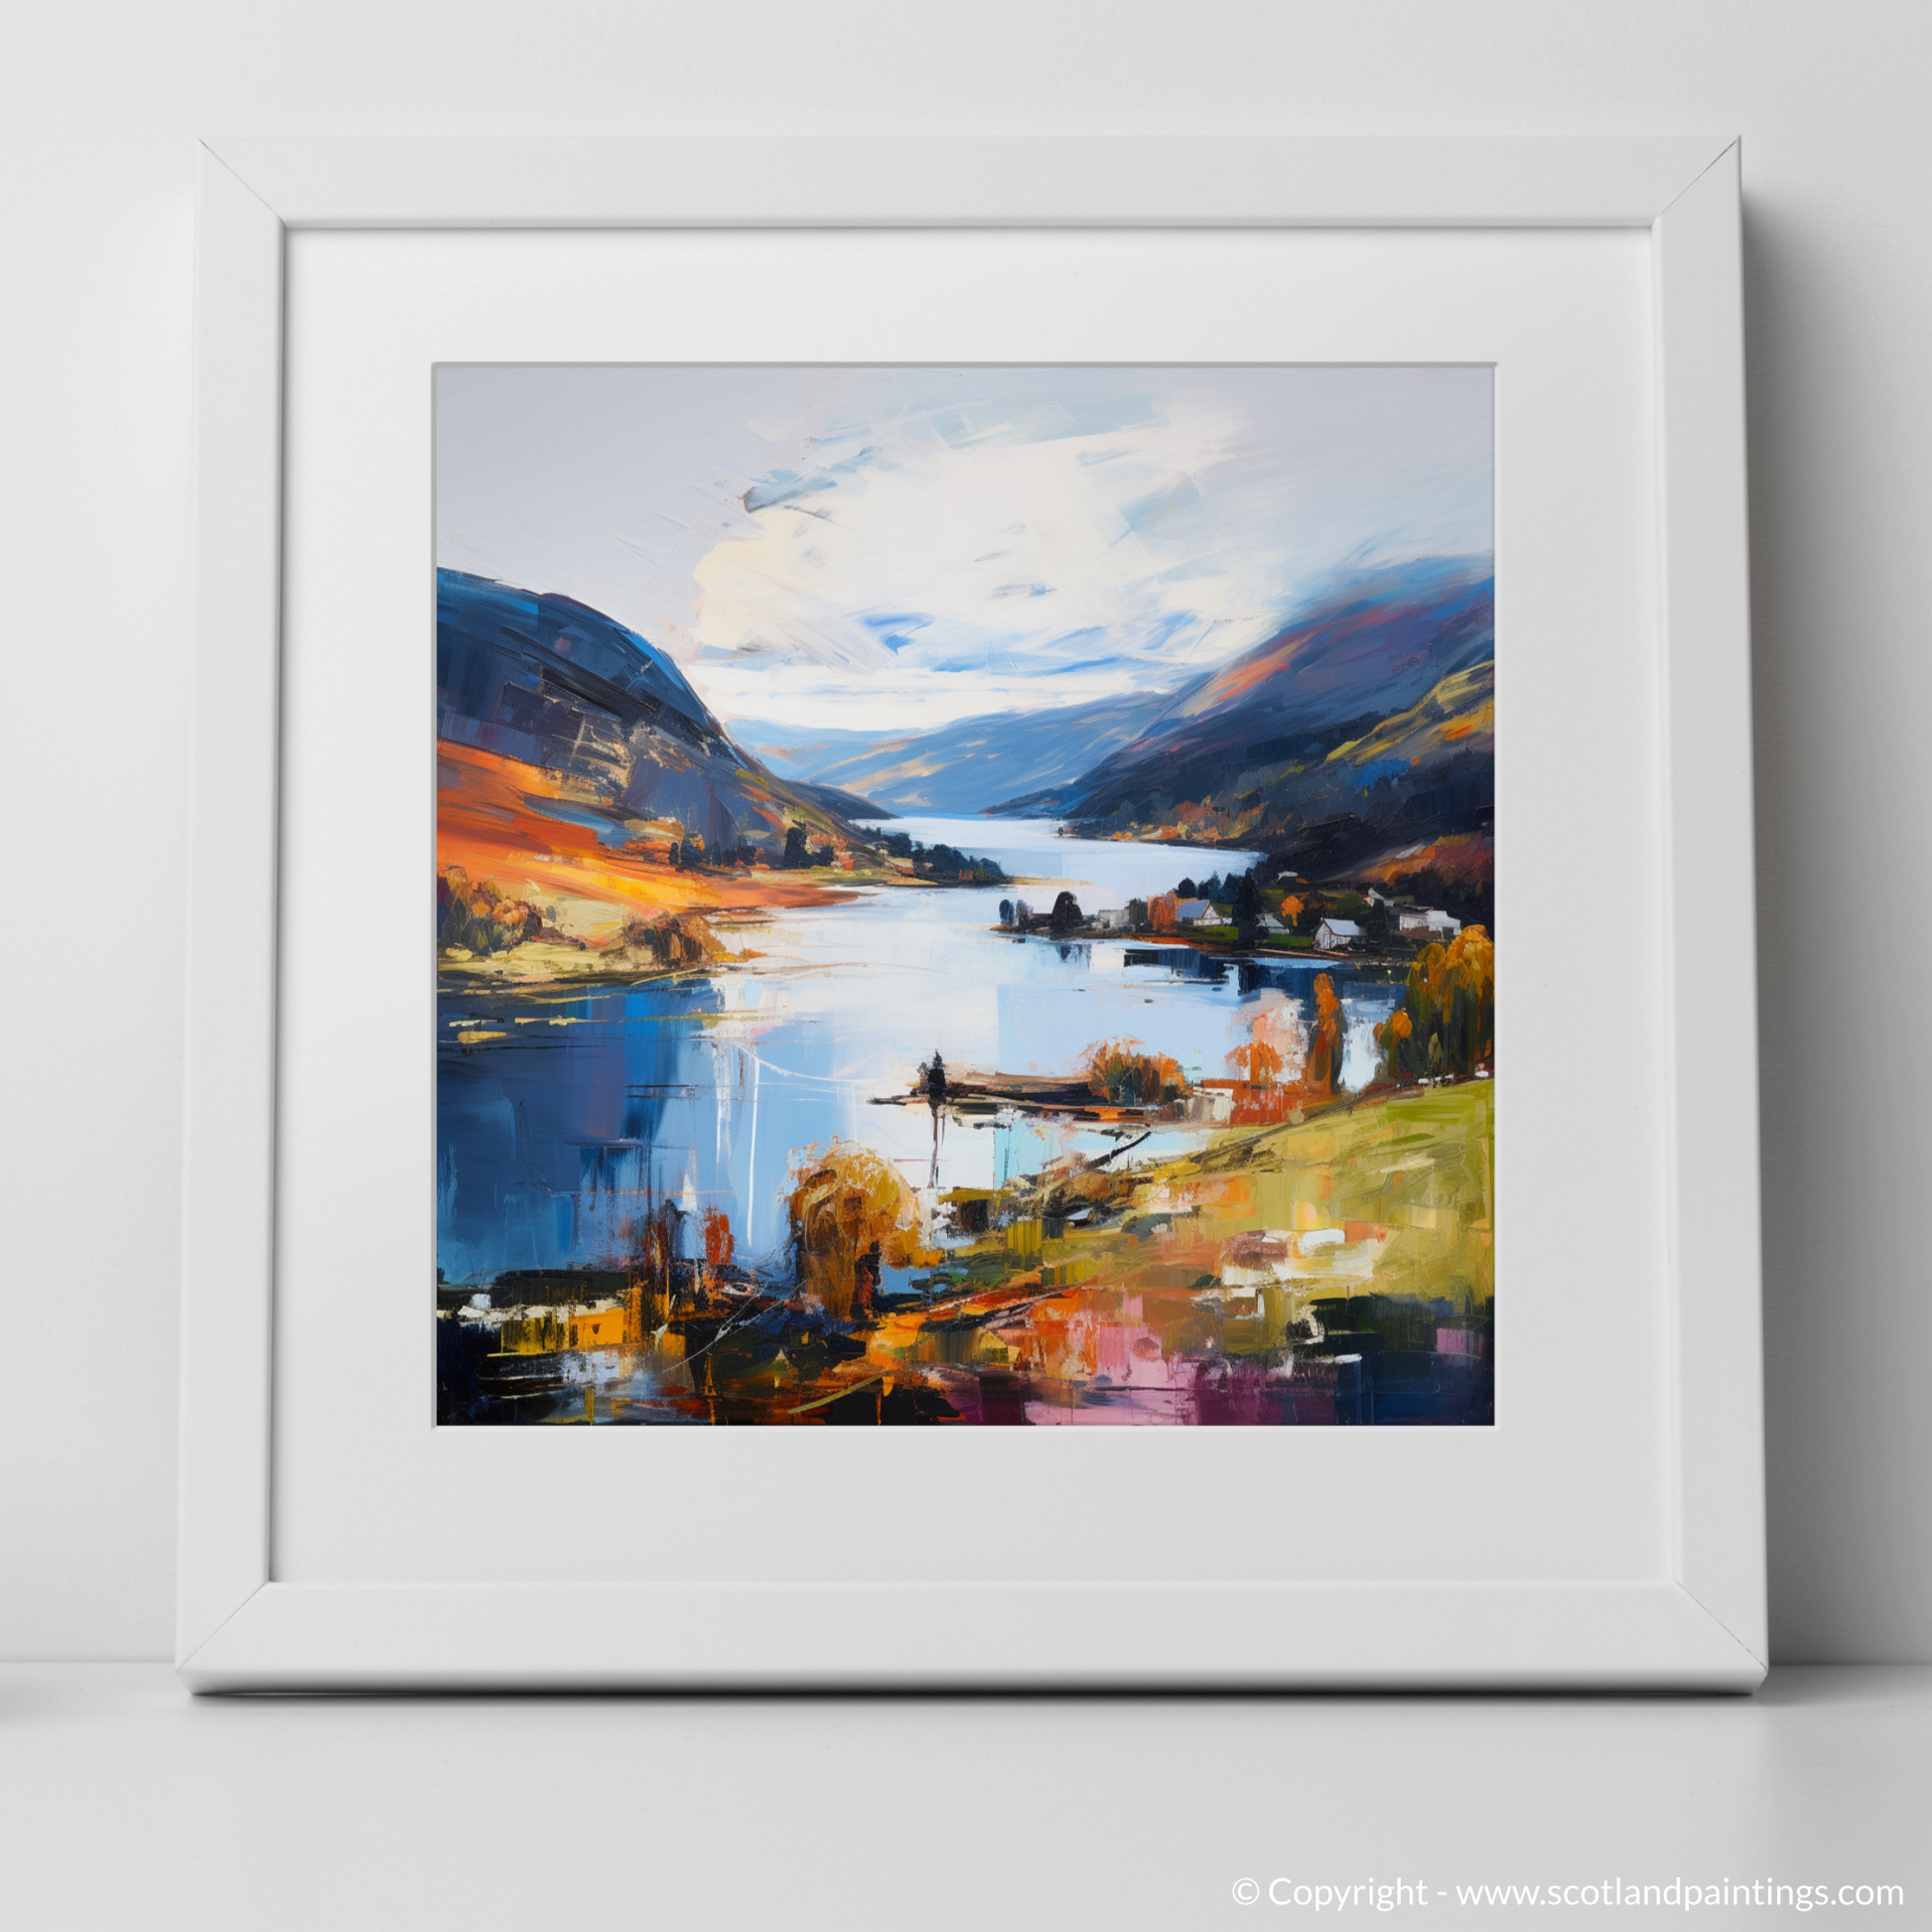 Art Print of Loch Earn, Perth and Kinross with a white frame